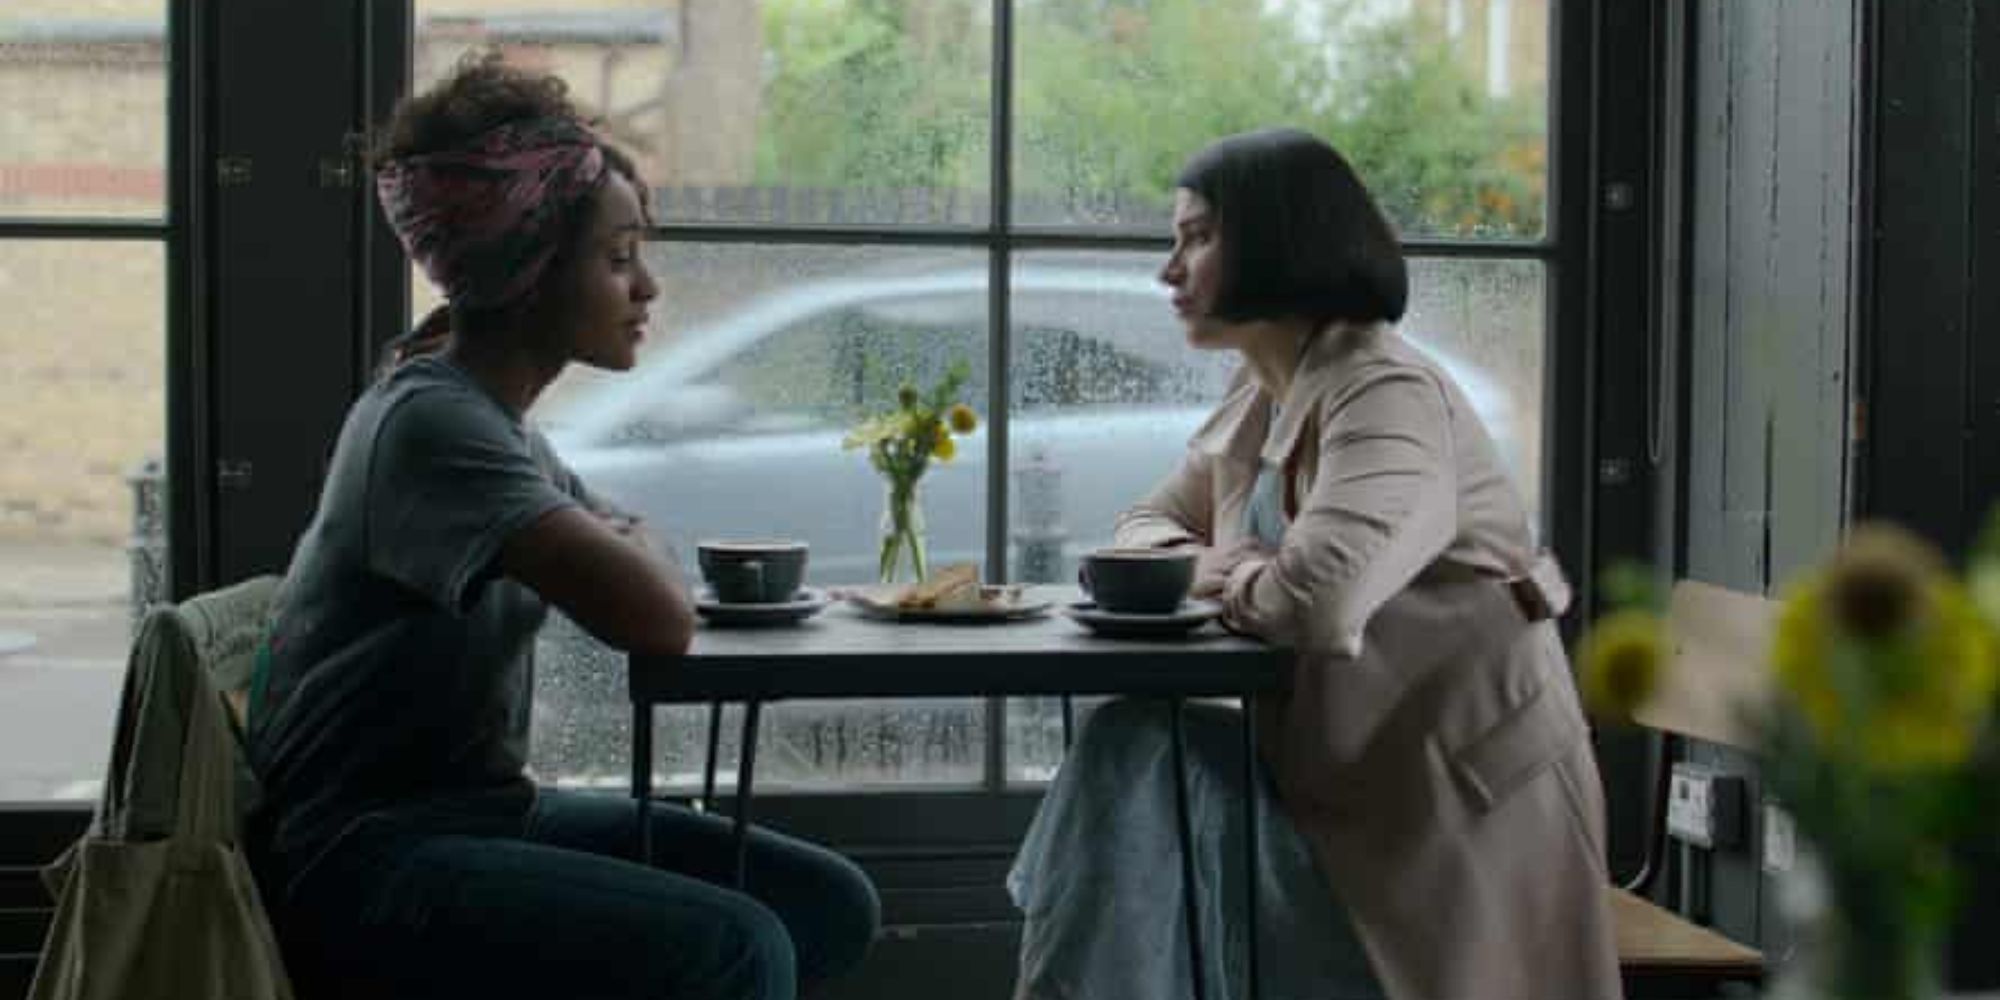 two women sitting at a cafe on a rainy day